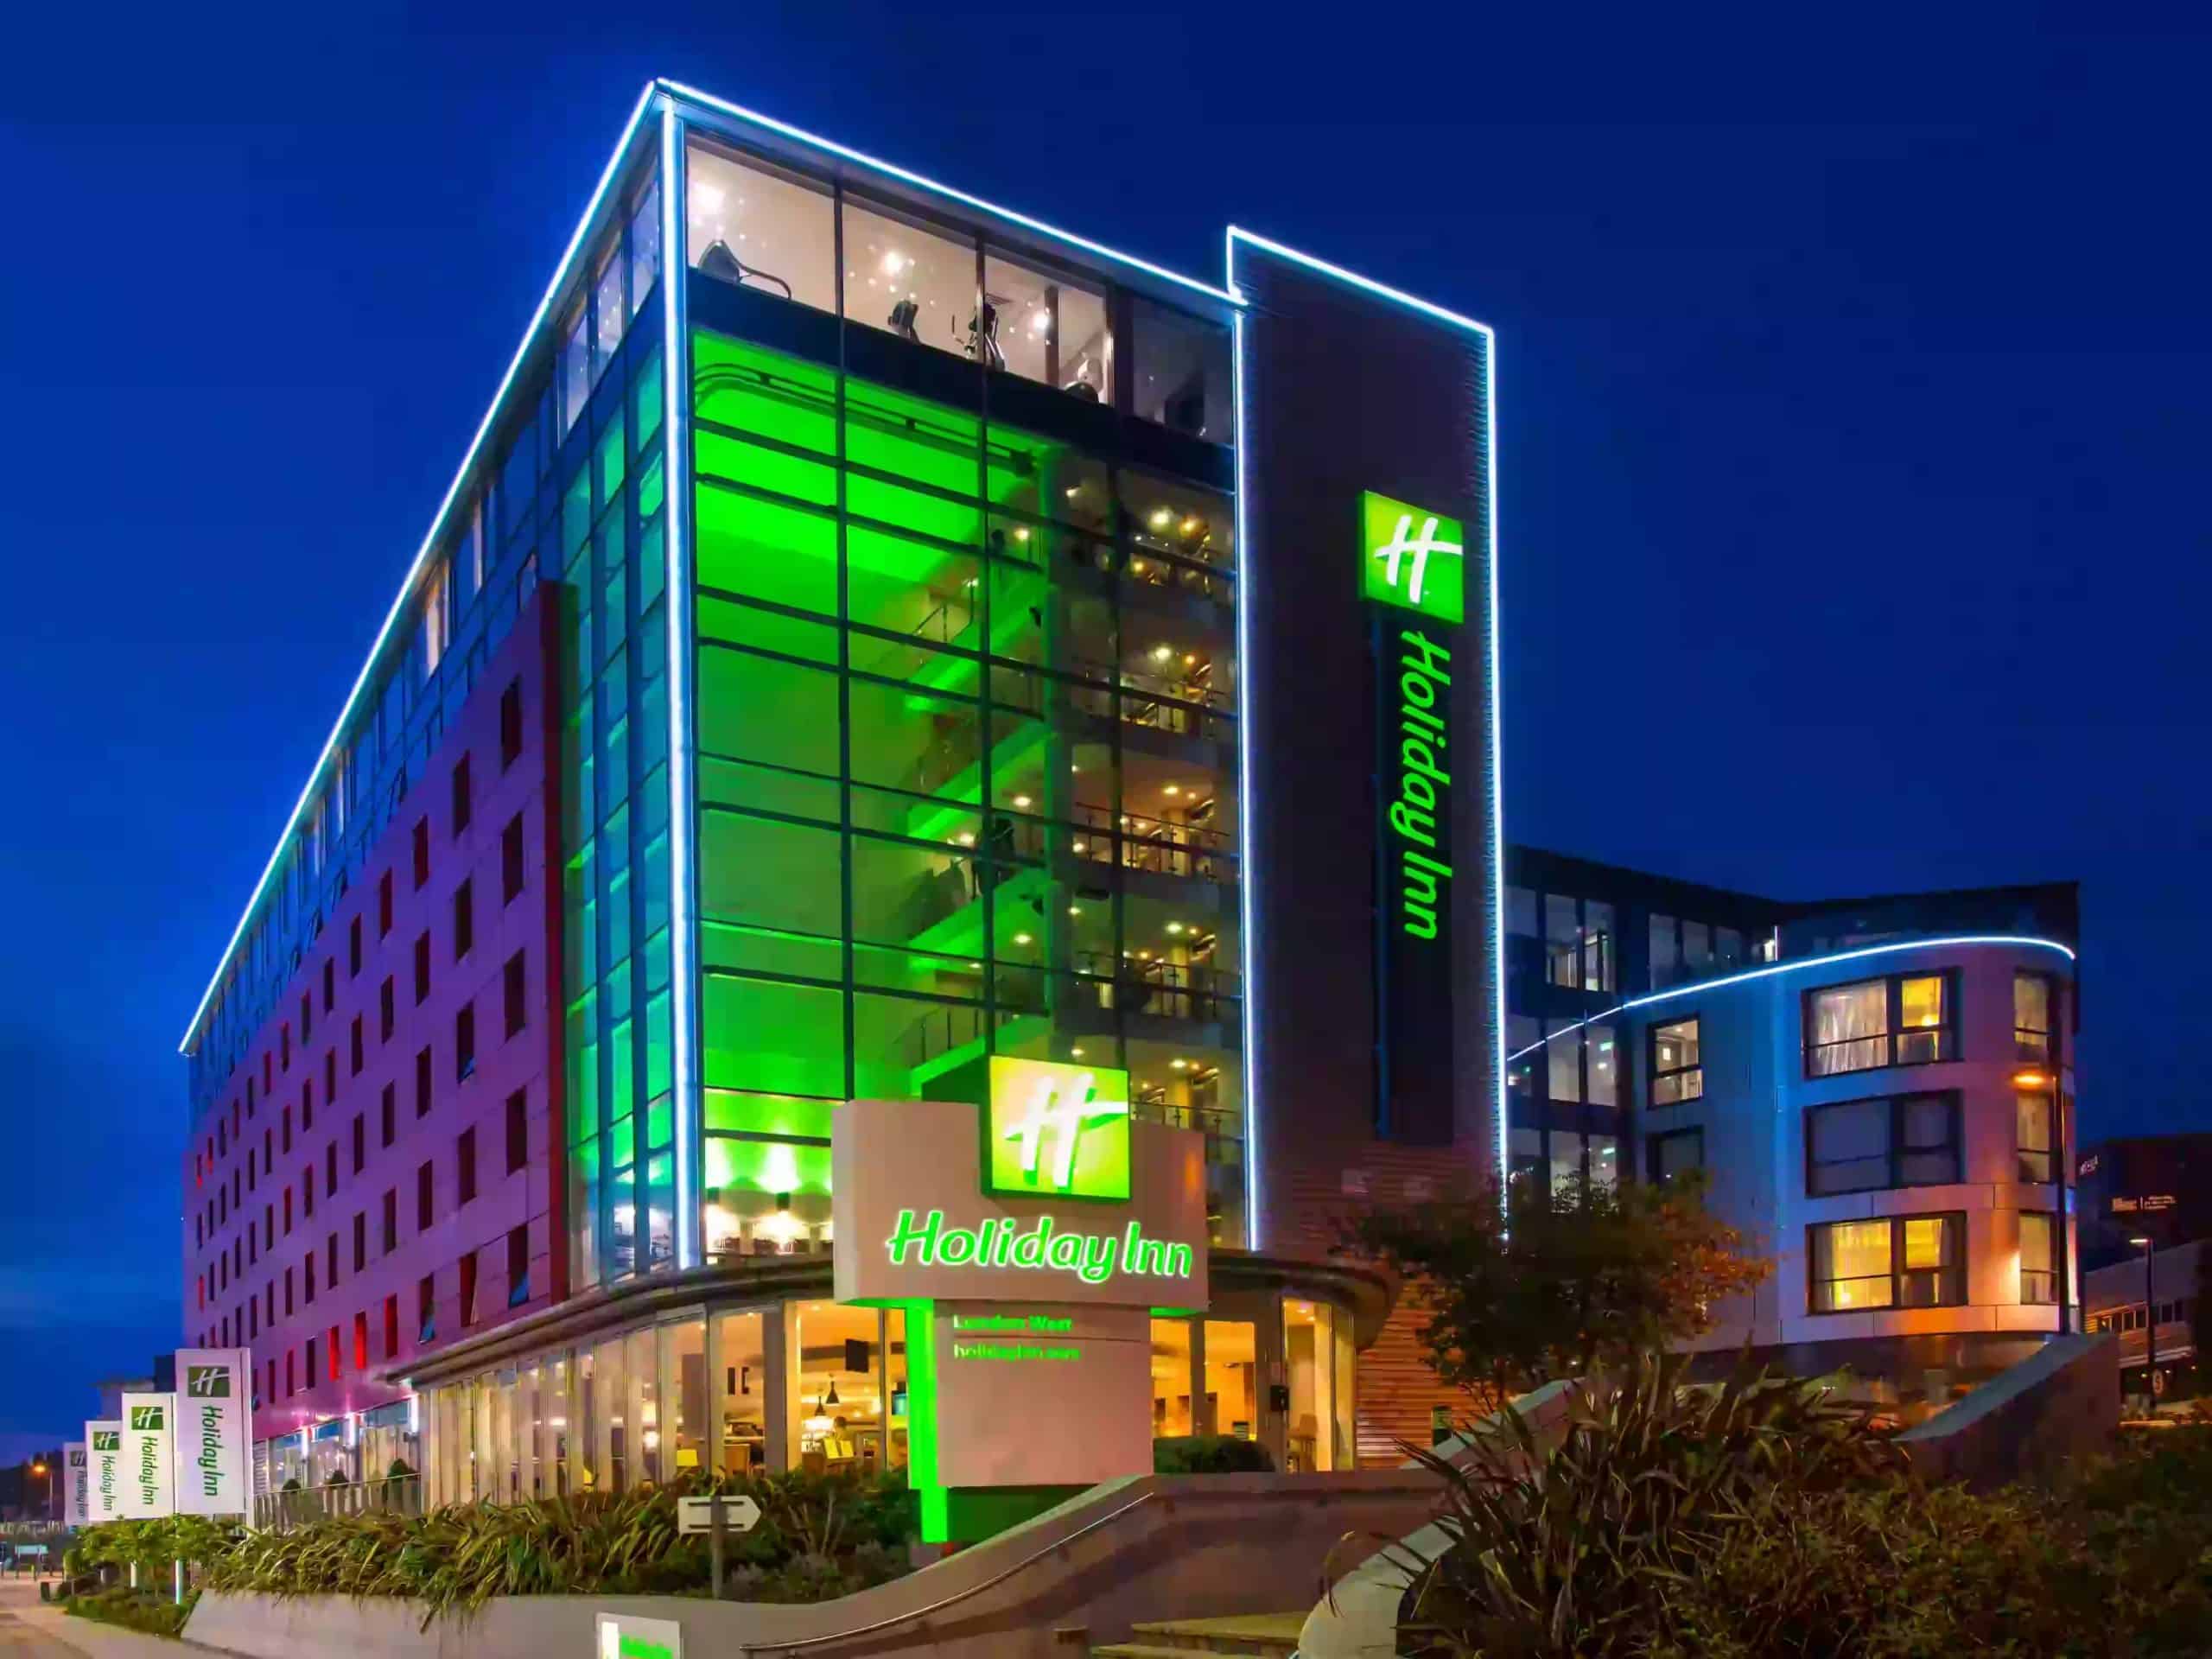 Making Guests Smile - Holiday Inn | Case Study | AKD Solutions